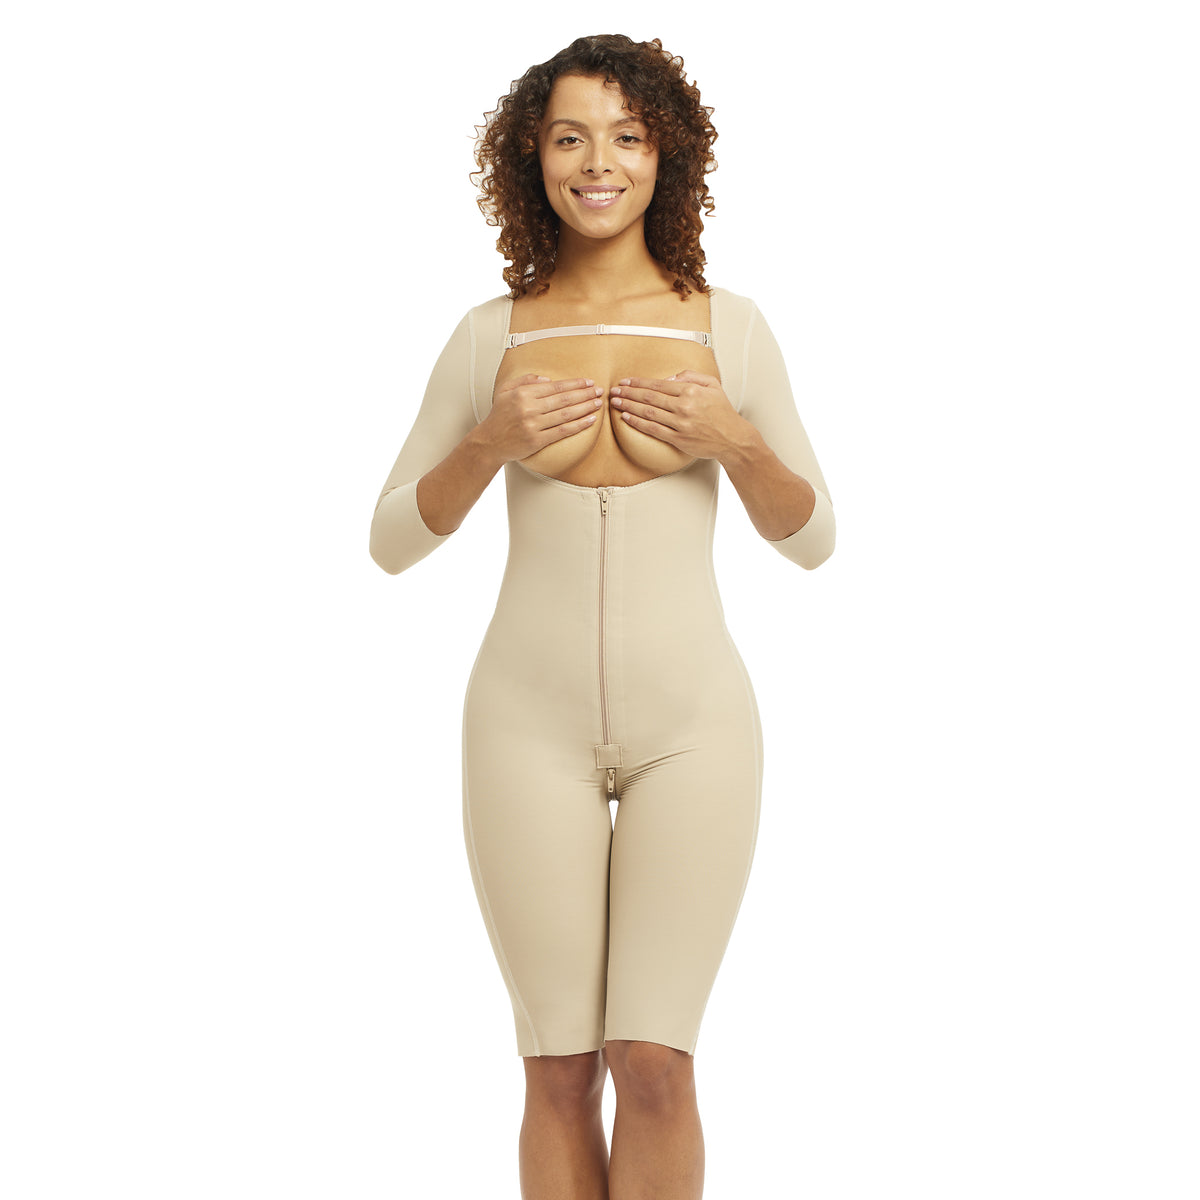 Women's BodySmootHers Open-Bust Bodysuit with Brief